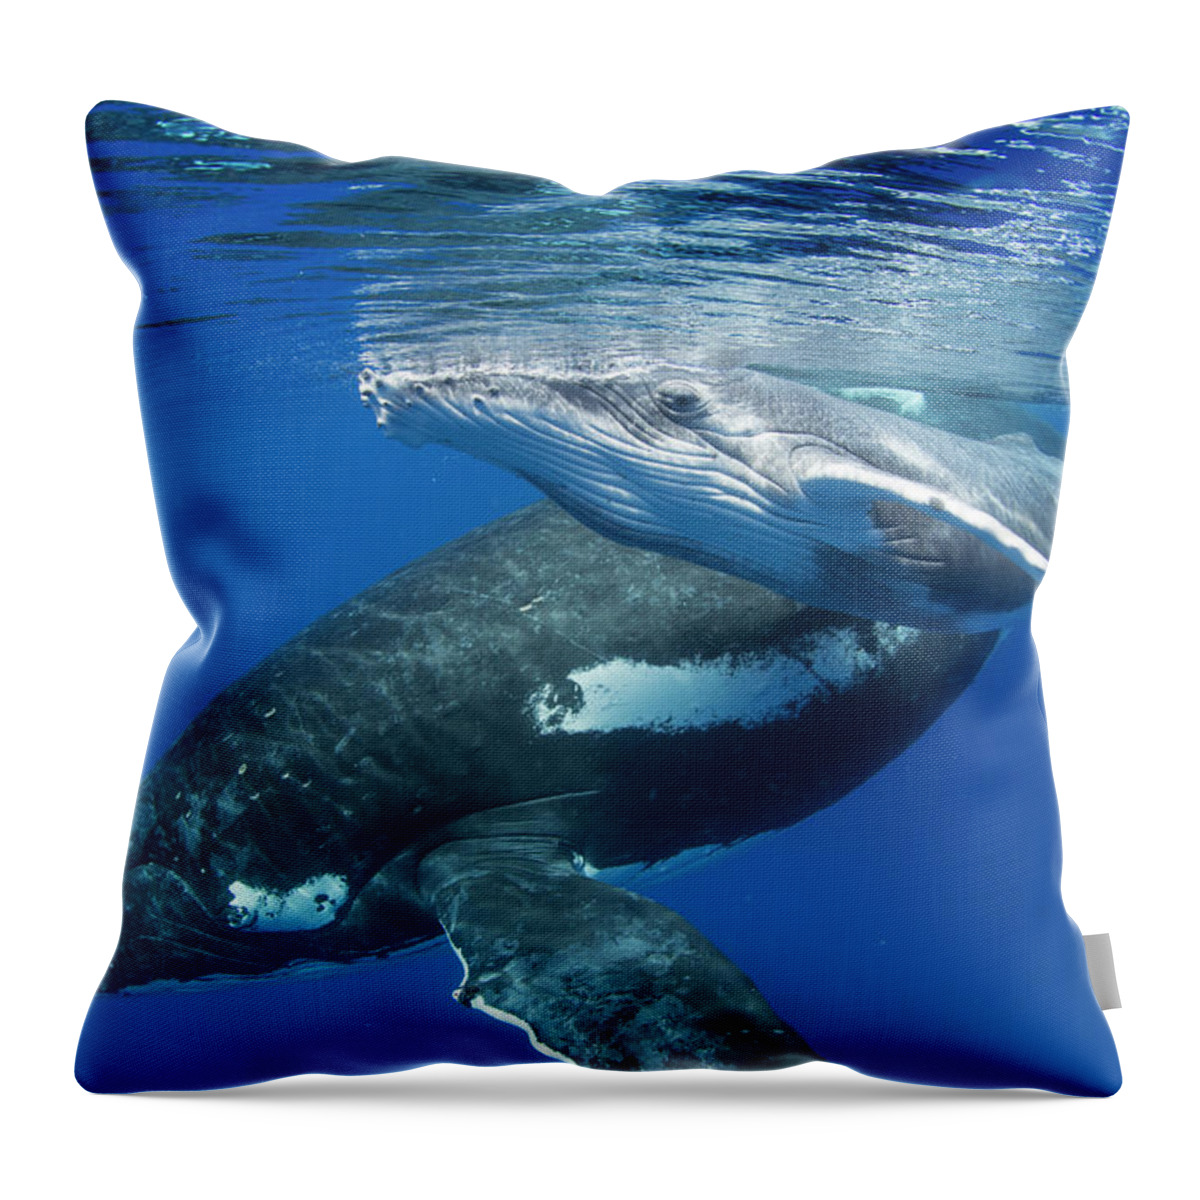 Suzi Eszterhas Throw Pillow featuring the photograph Humpback Whale And Young Calf by Suzi Eszterhas